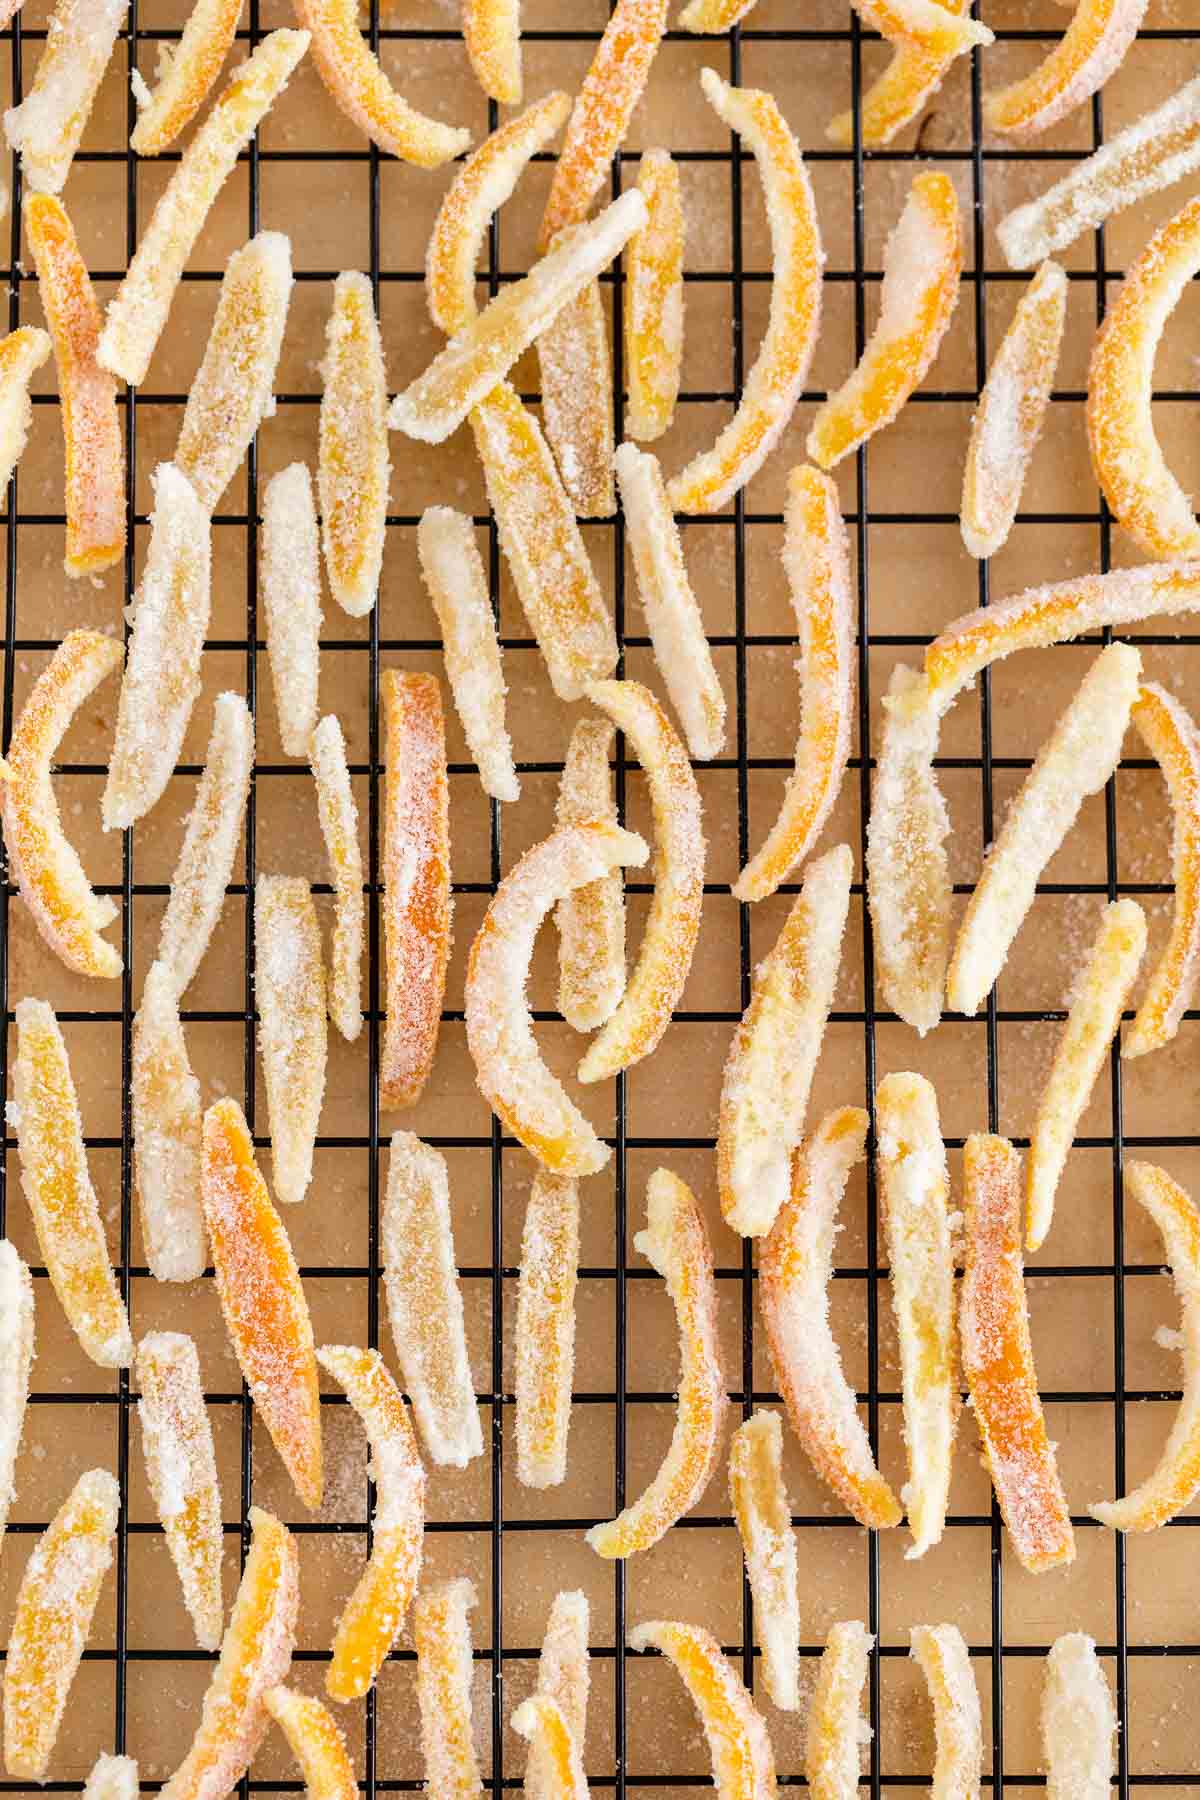 Many stripes of candied peel on a cooling rack.